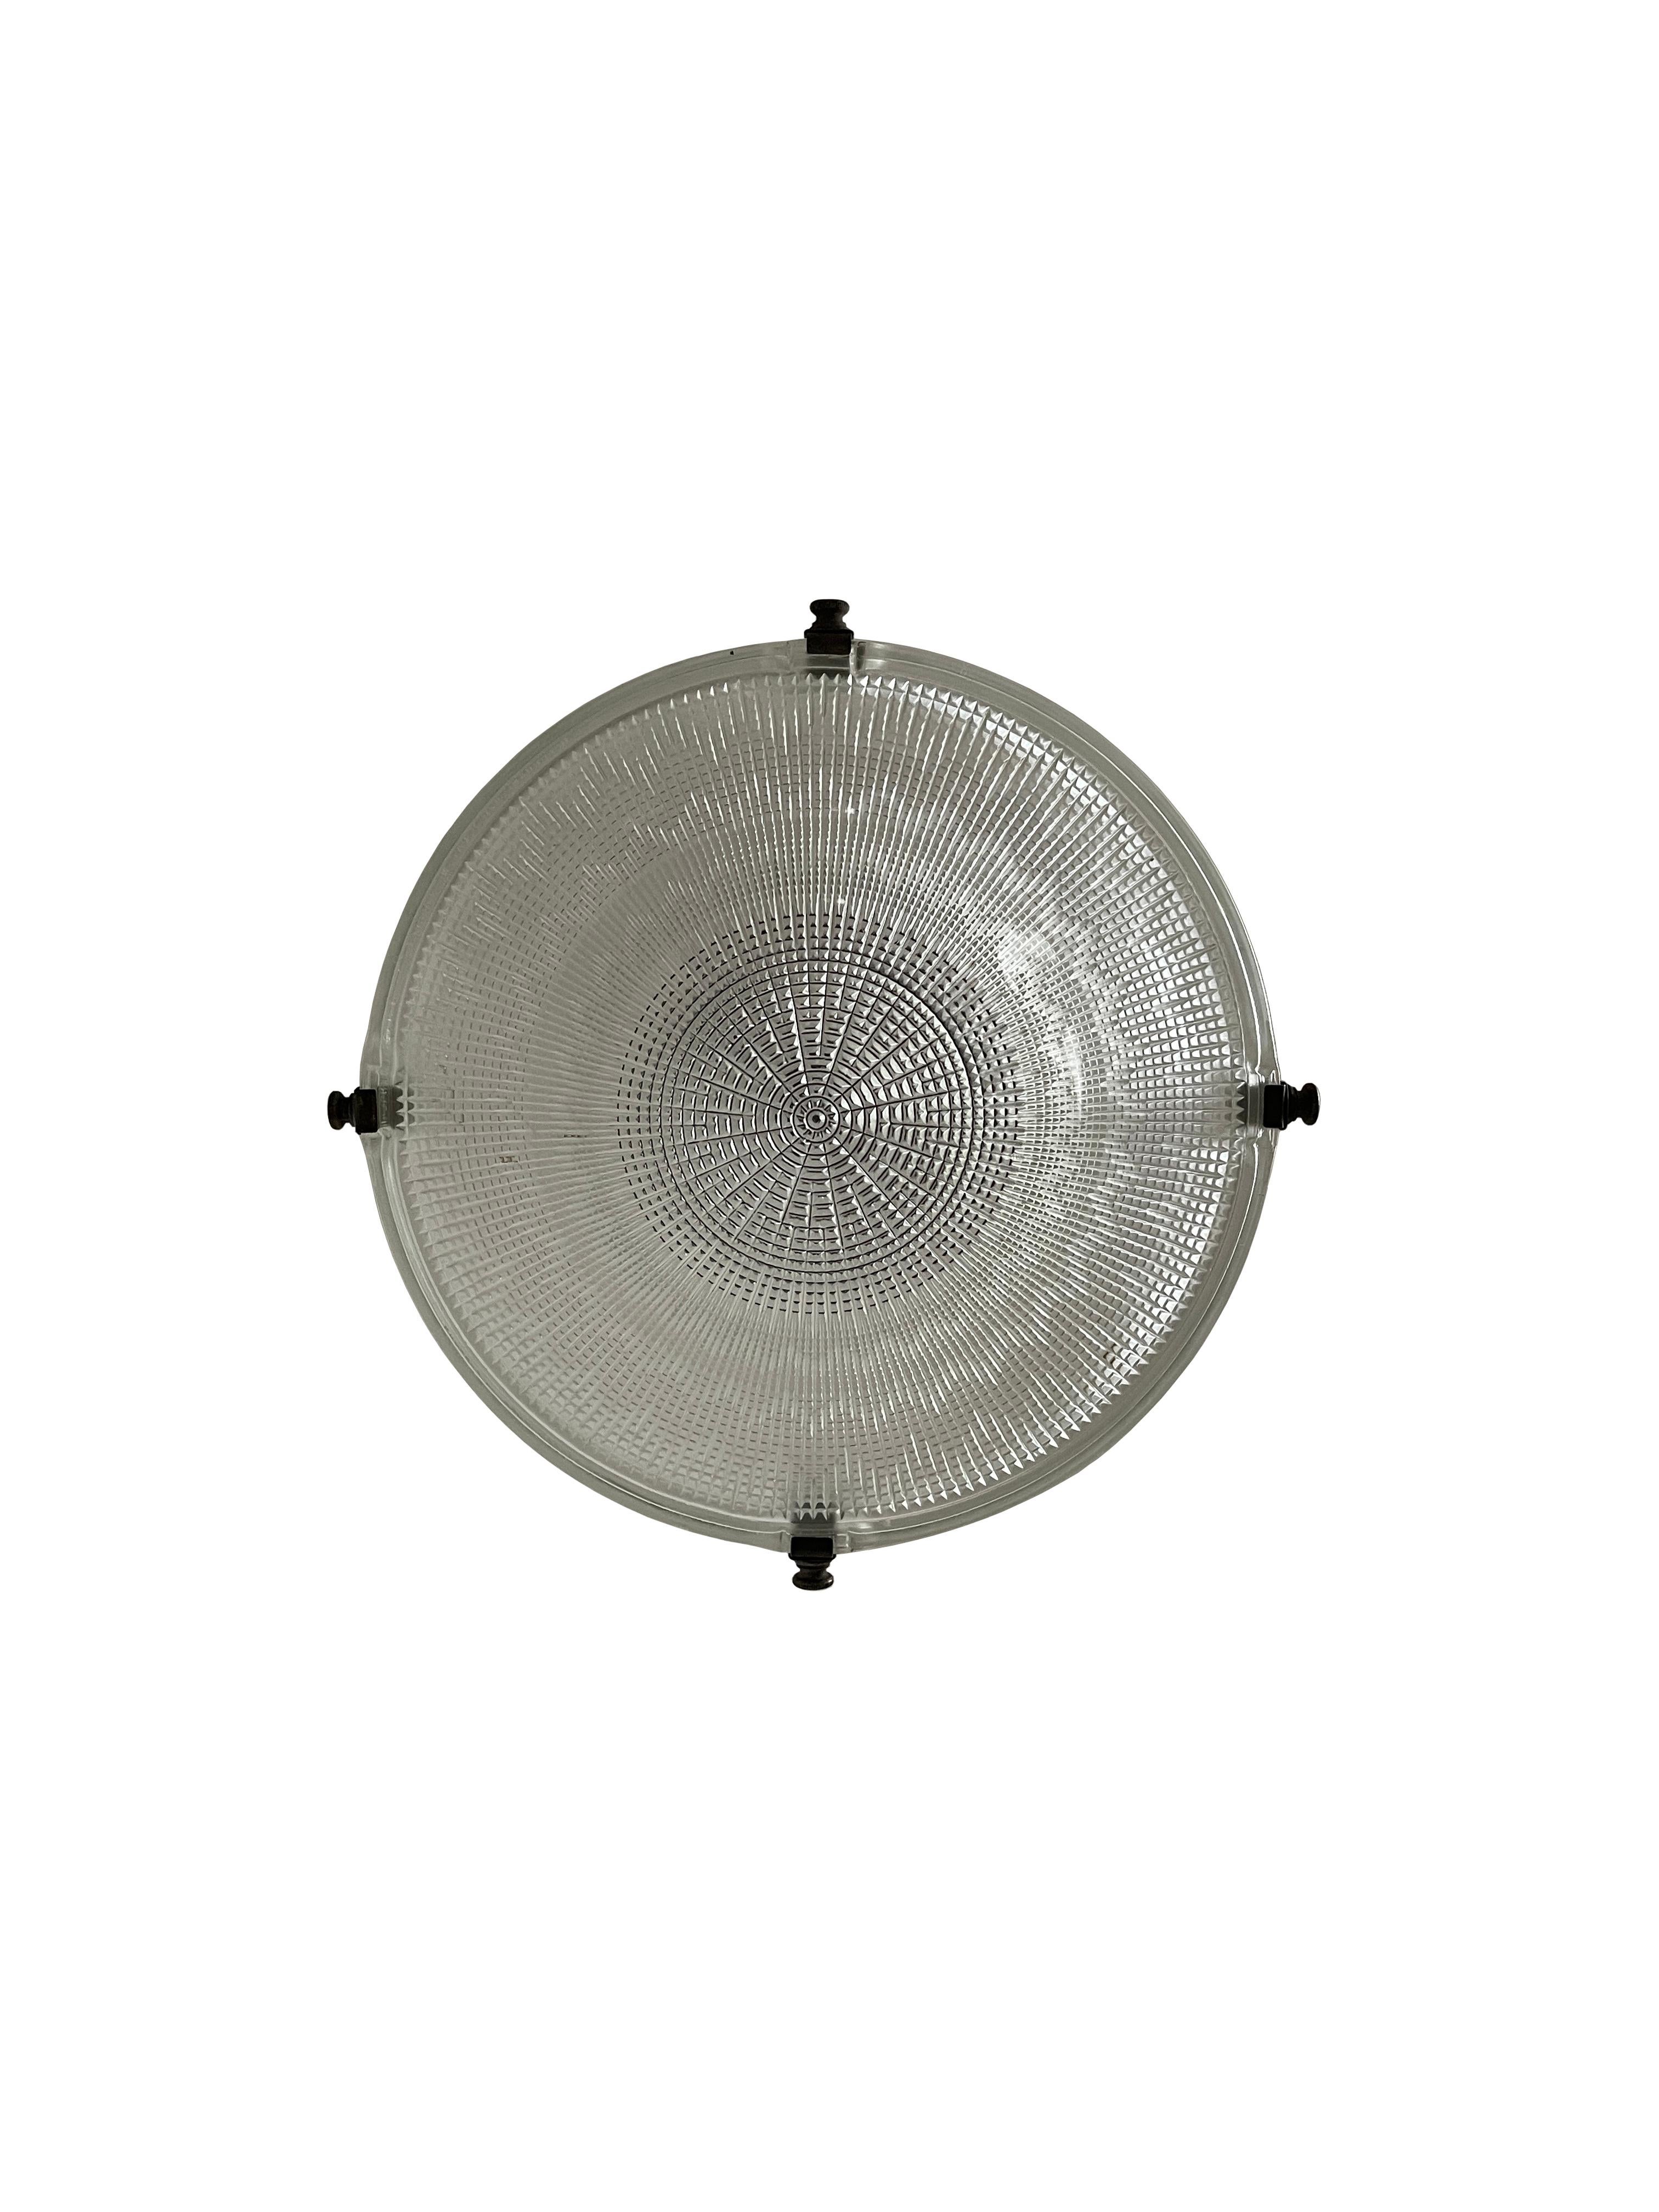 Antique Vintage Industrial Holophane Prismatic Glass Ceiling Pendant Light Lamp In Good Condition For Sale In Sale, GB